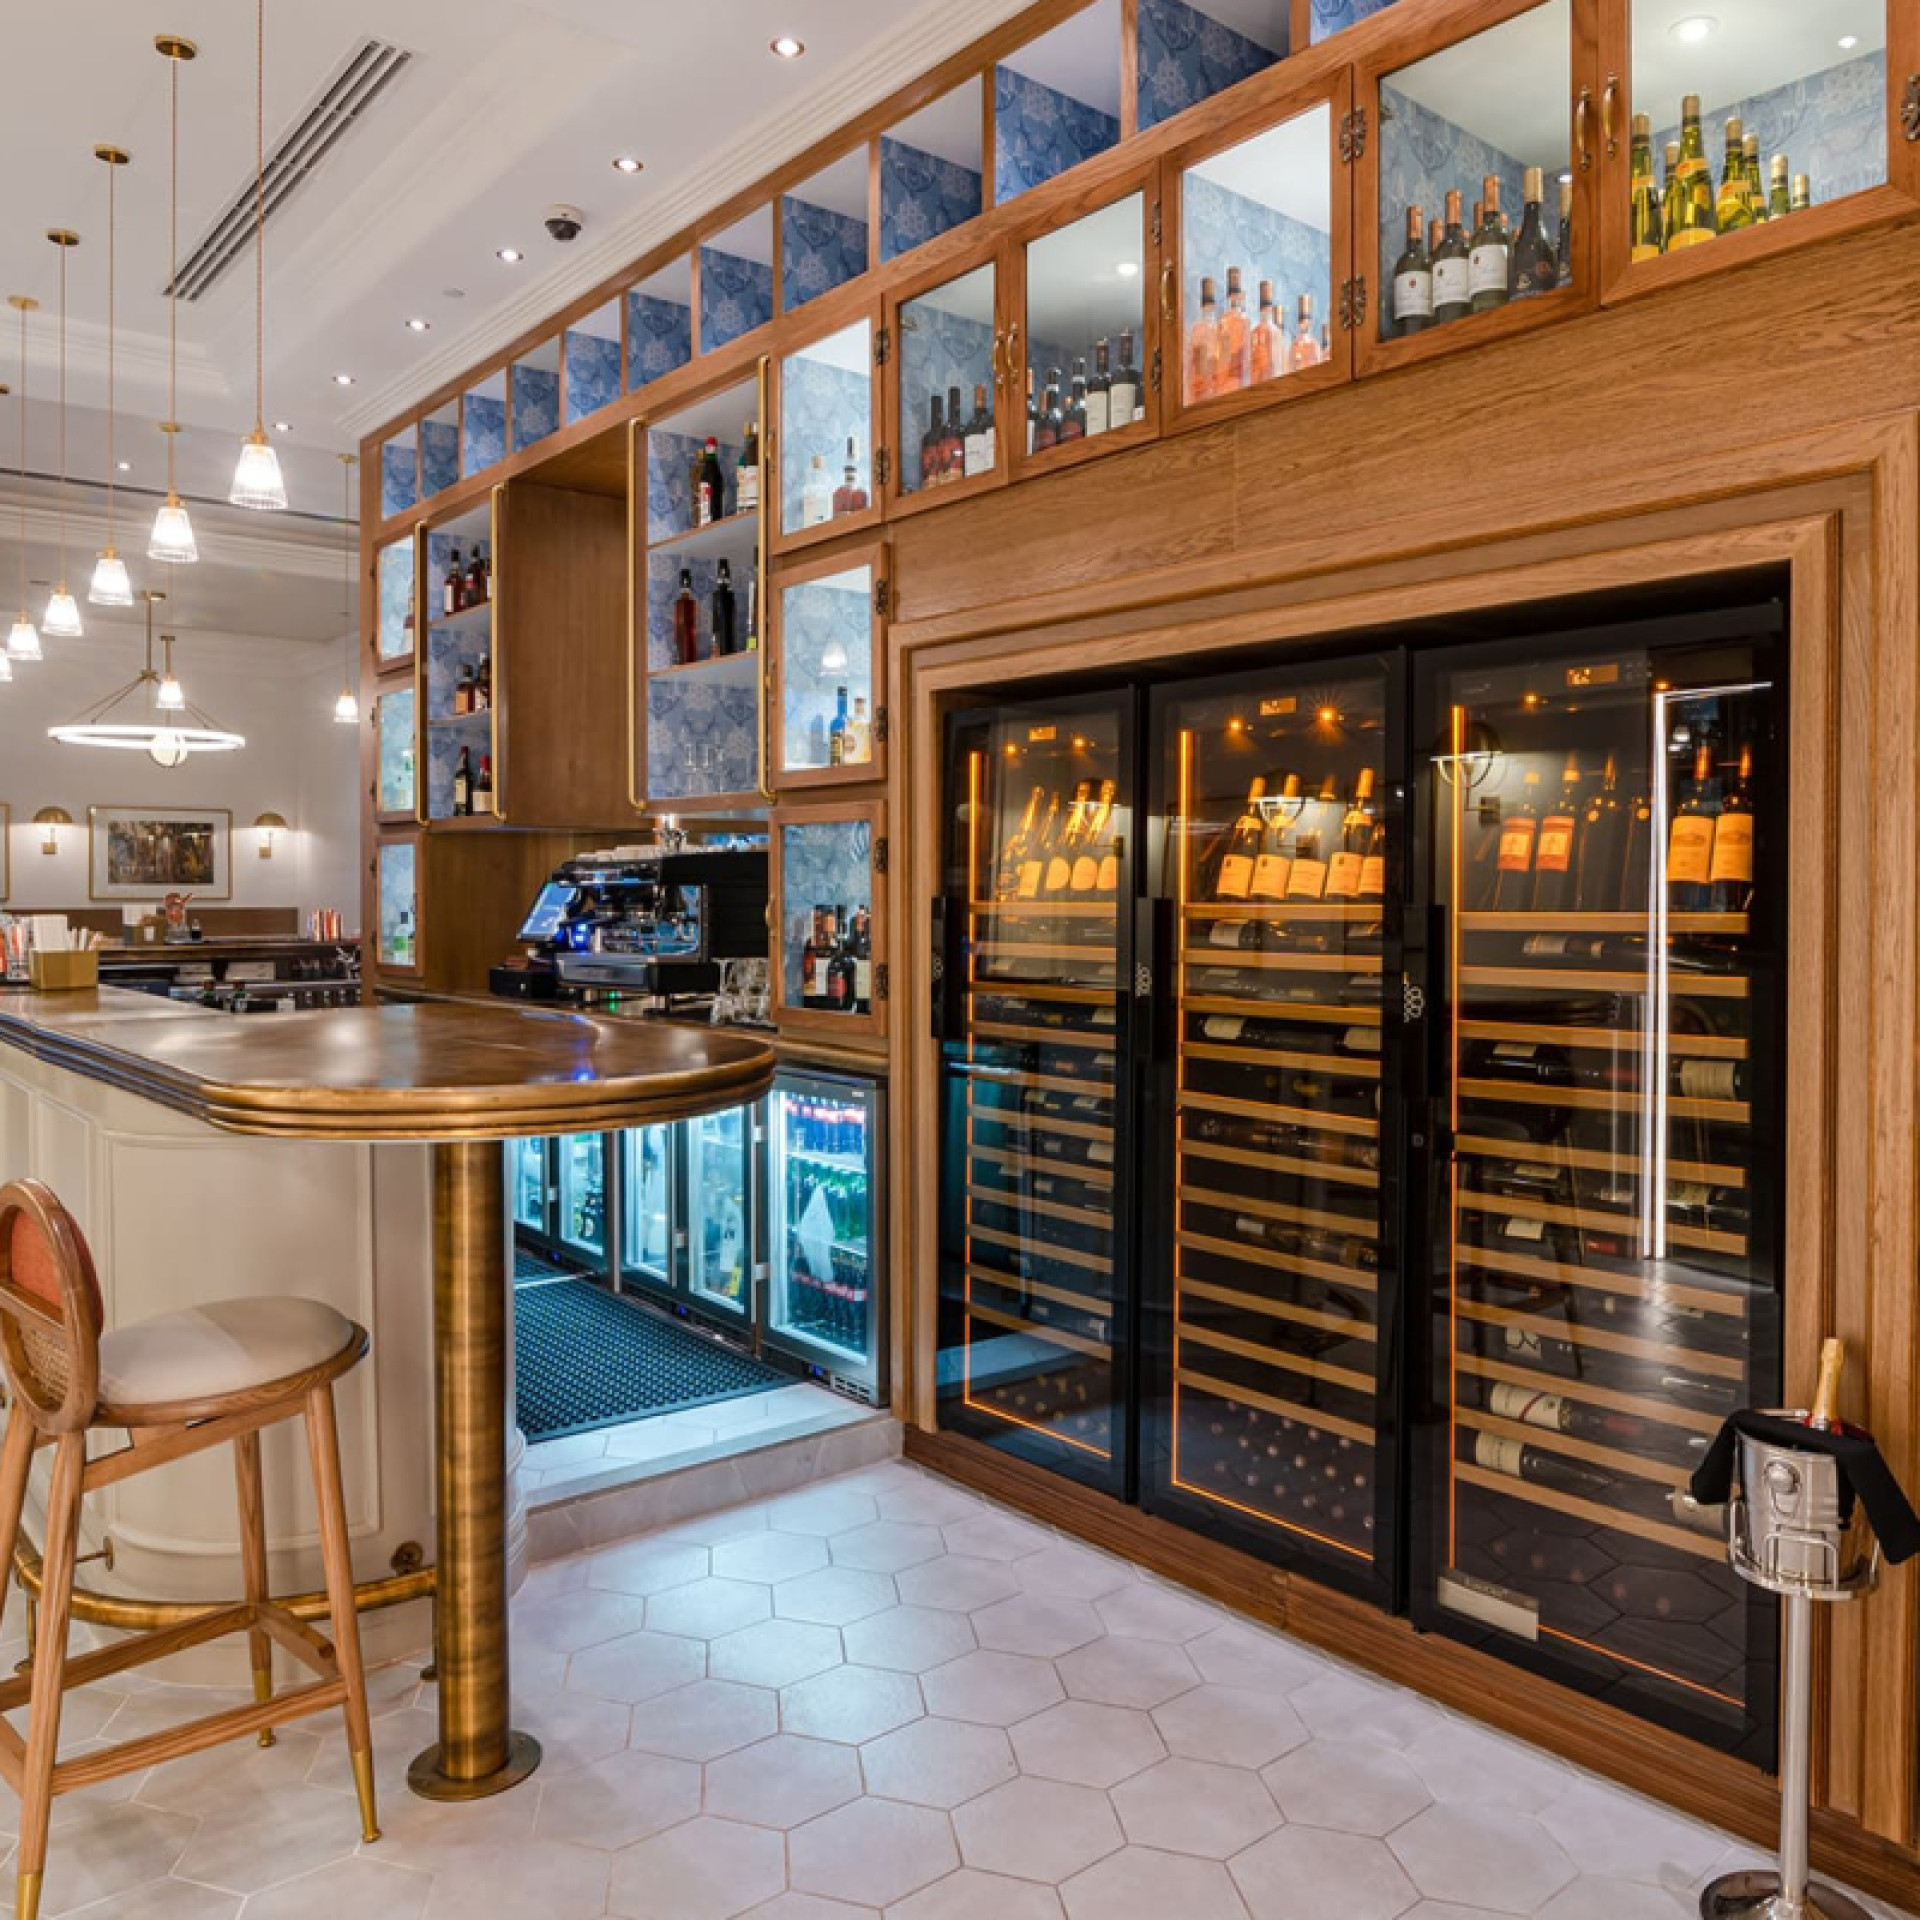 3 professional service cellars with integrated lighting as standard in a custom-made wooden unit to enhance the wine list in this restaurant.